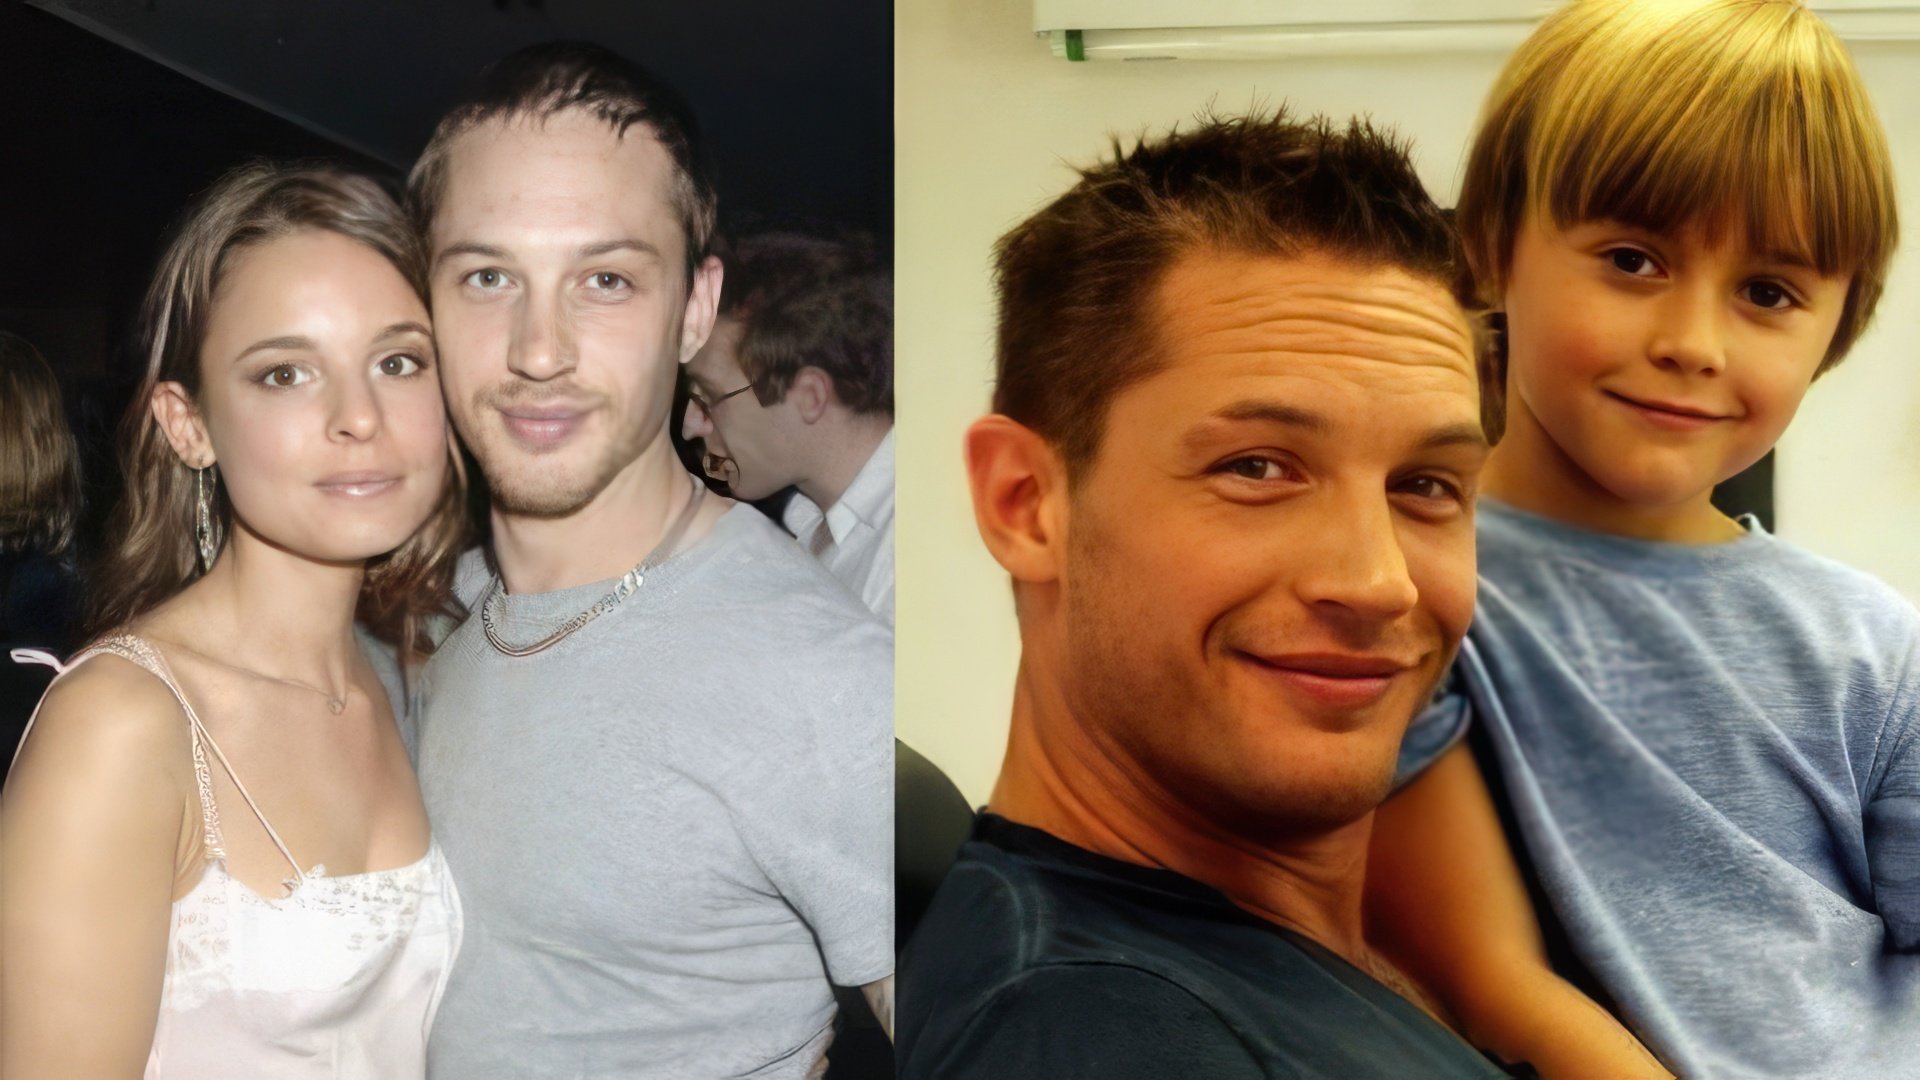 Tom Hardy has a son Louis from Rachael Speed